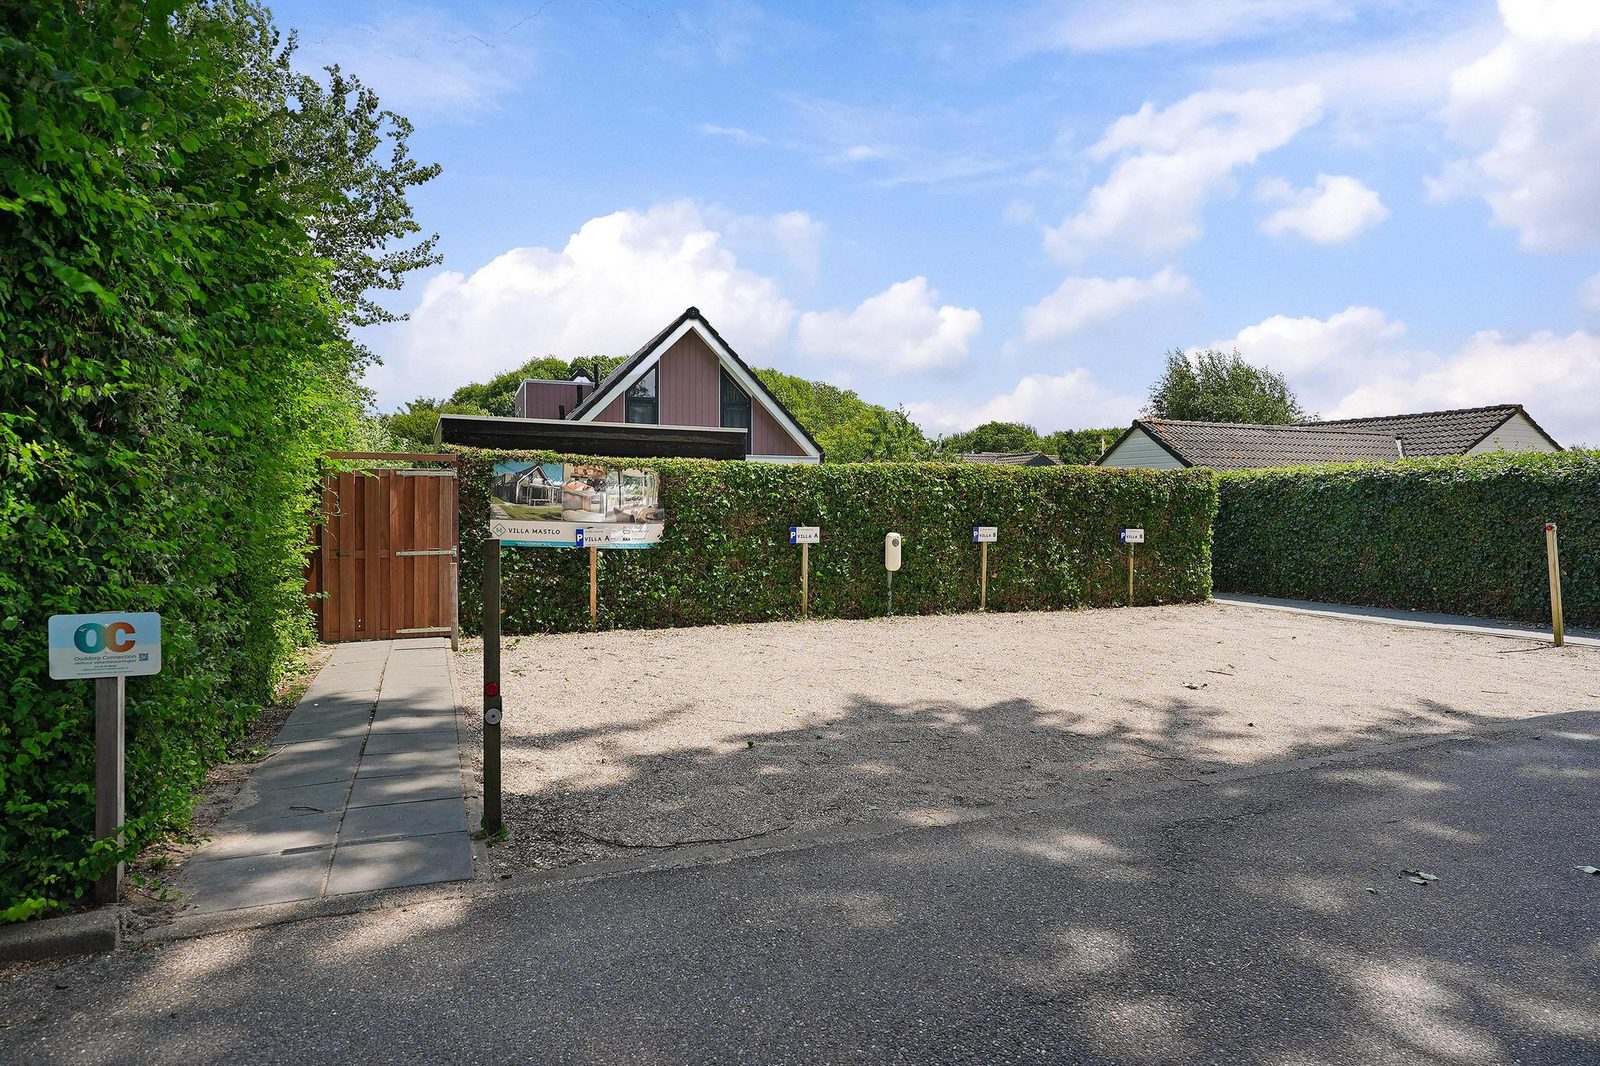 Oude Nieuwelandseweg 33B - Ouddorp - Villa Hopper (with jacuzzi, extra costs for use)